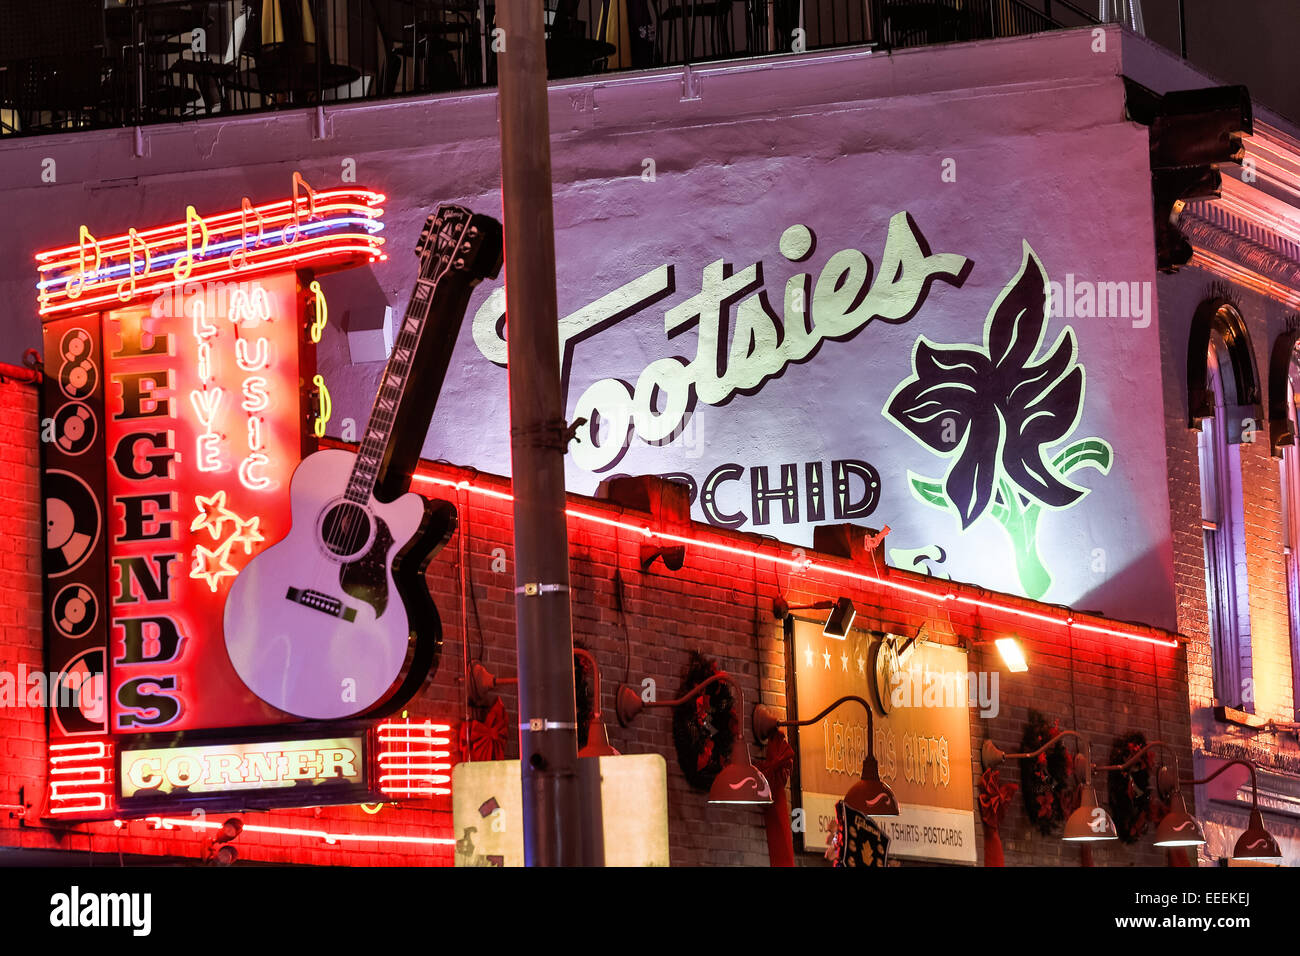 Signs for Tootsies, Legends and other honky-tonks on lower Broadway in Nashville, TN. Stock Photo